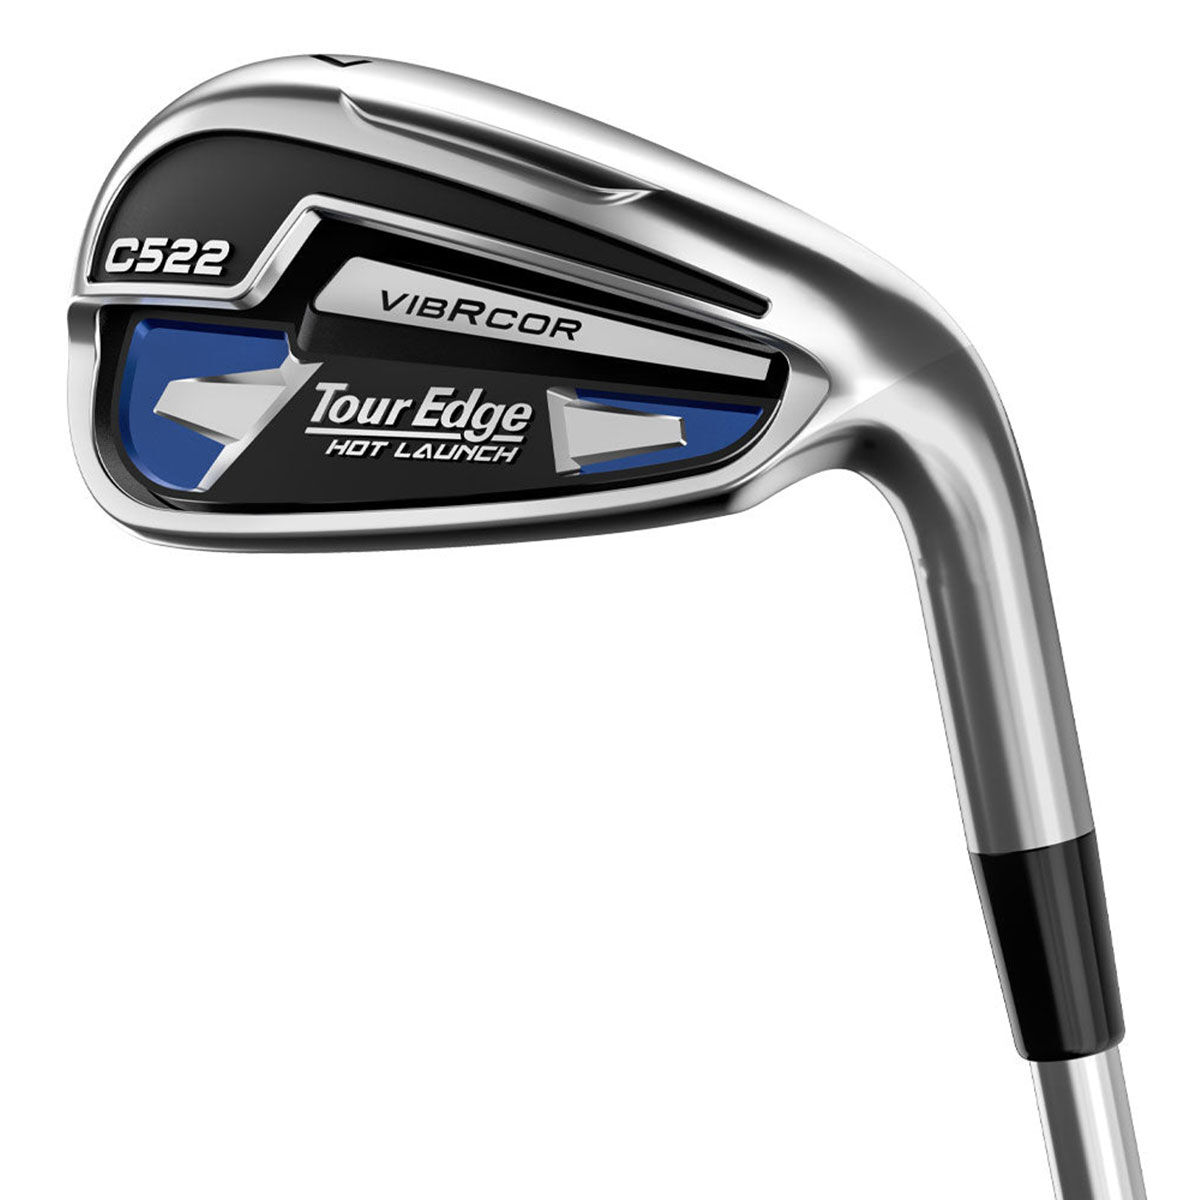 Tour Edge Silver and Black Hot Launch C522 Right Hand Graphite 5-pw (6 Golf Irons), Size: Regular | American Golf von Tour Edge